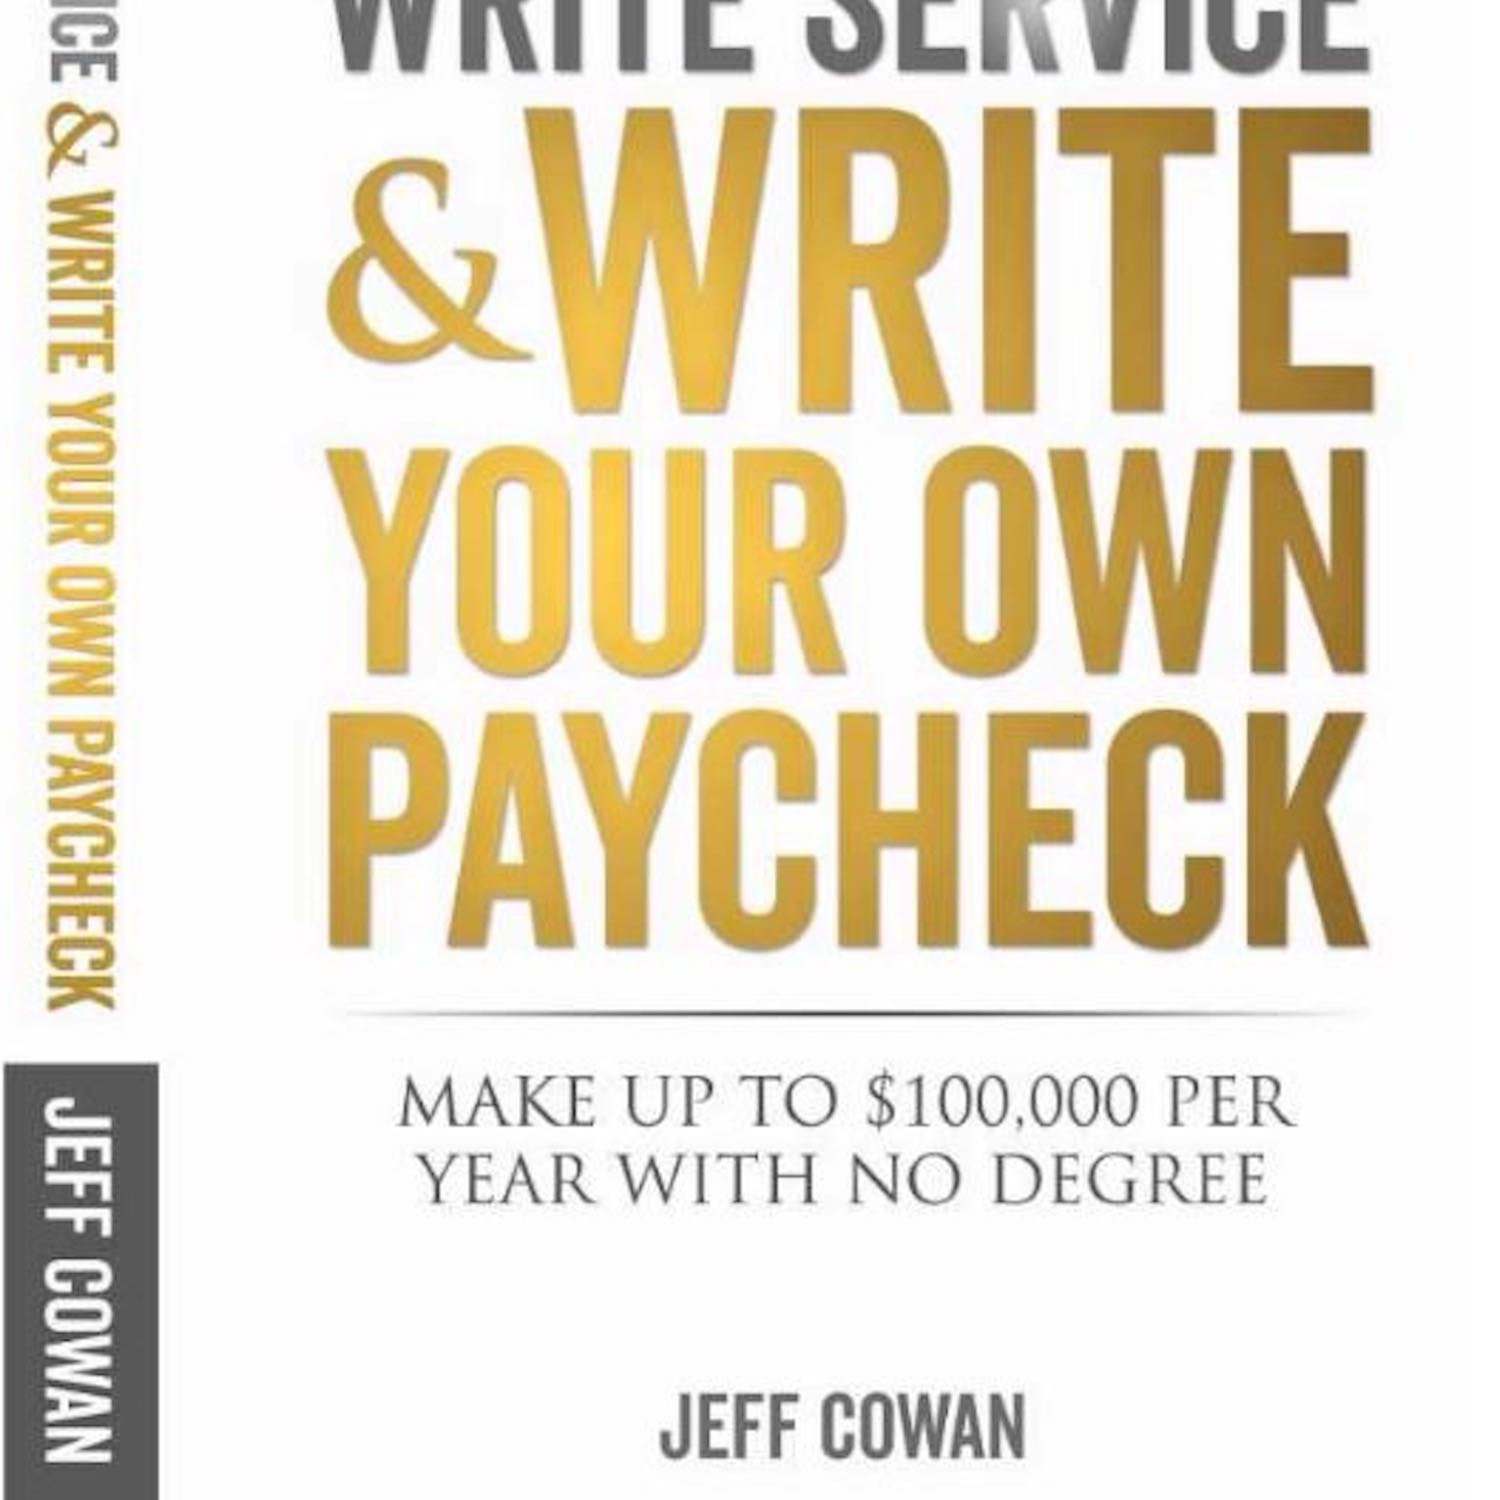 Write Service and Write Your own Paycheck